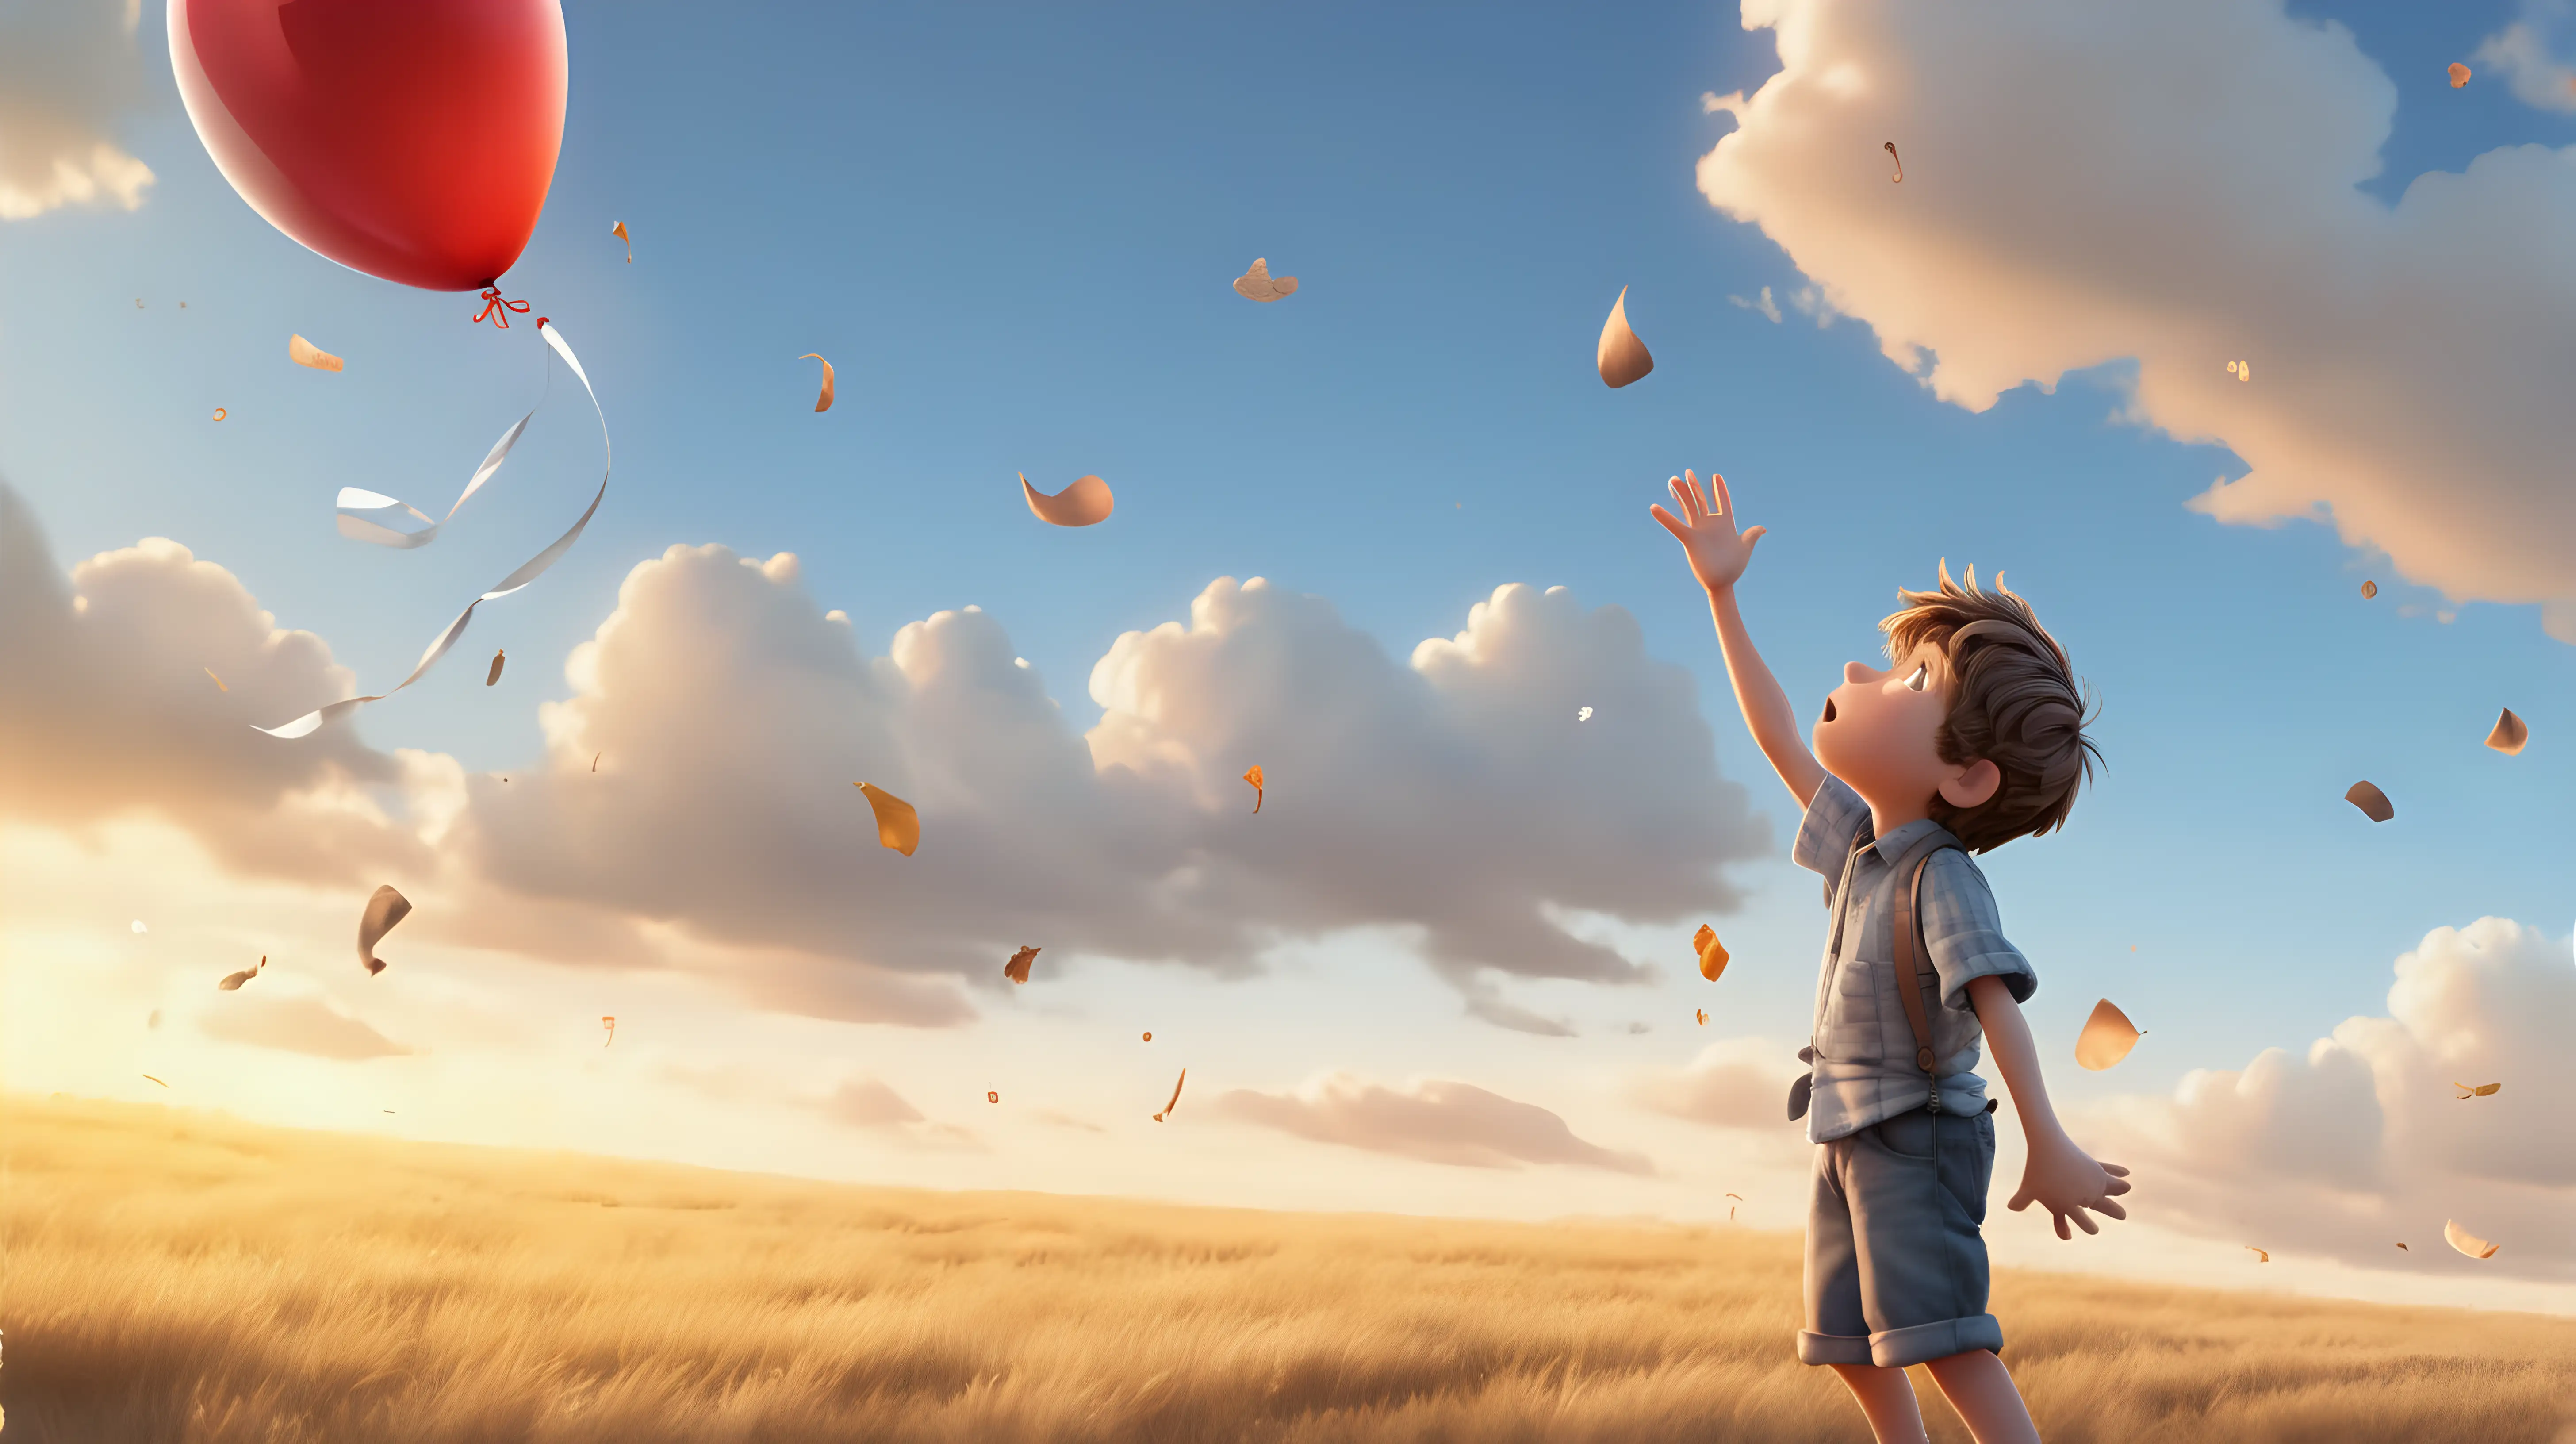 Charming Animated Boy Releasing Deflated Balloon Symbolizing Lost Dreams